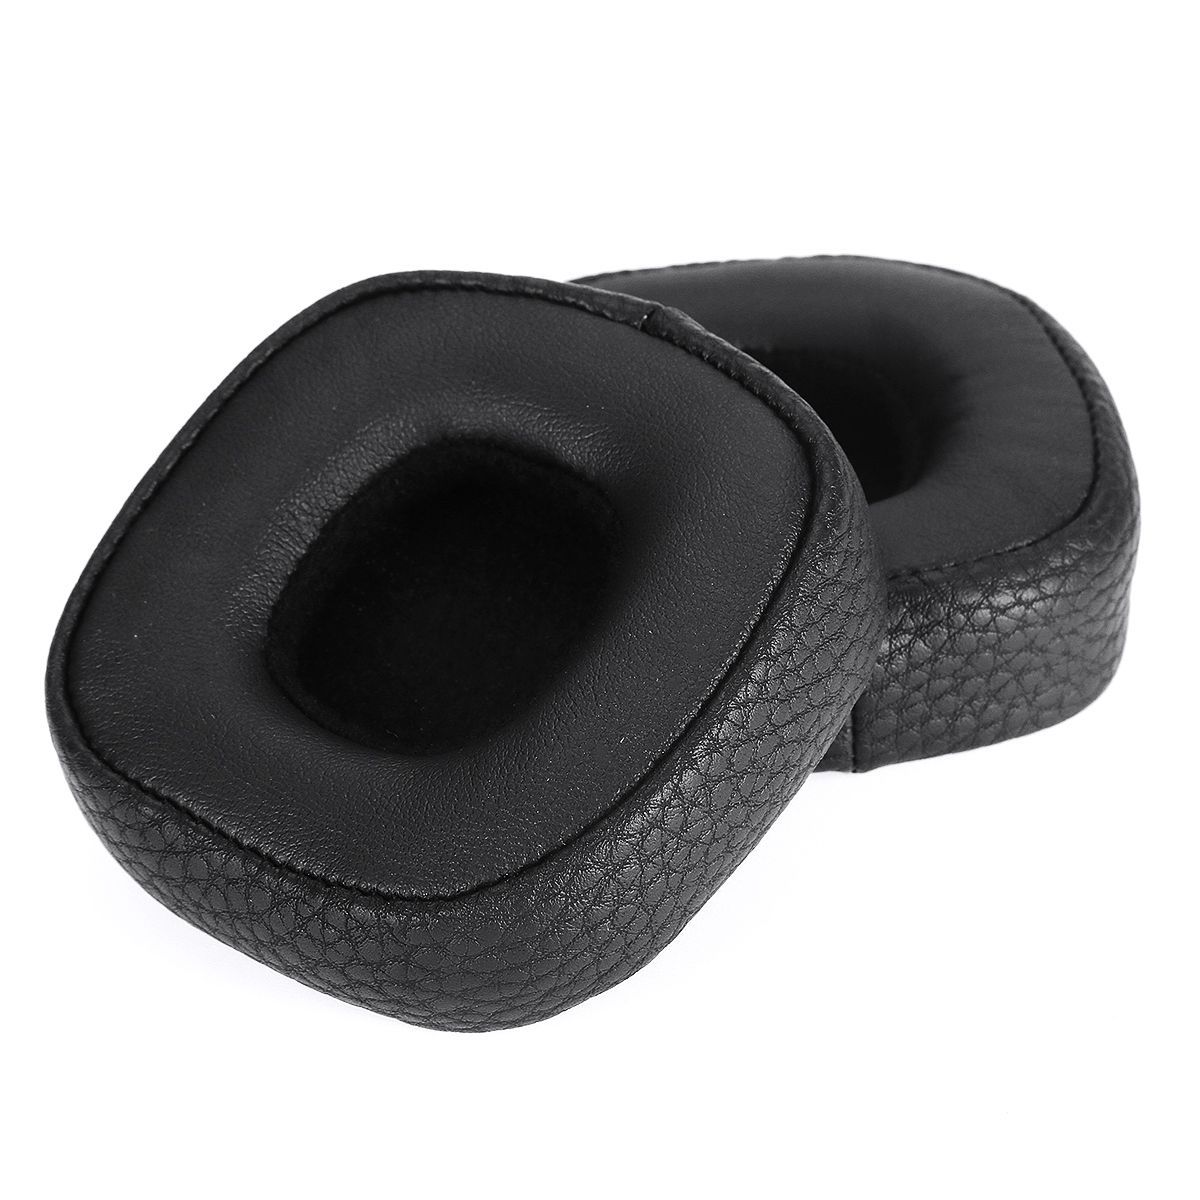 2Pcs-Replacement-Ear-Pads-Protector-for-MID-ANC-for-Major-I-II-III-Headphone-Standard-Comfortable-So-1590915